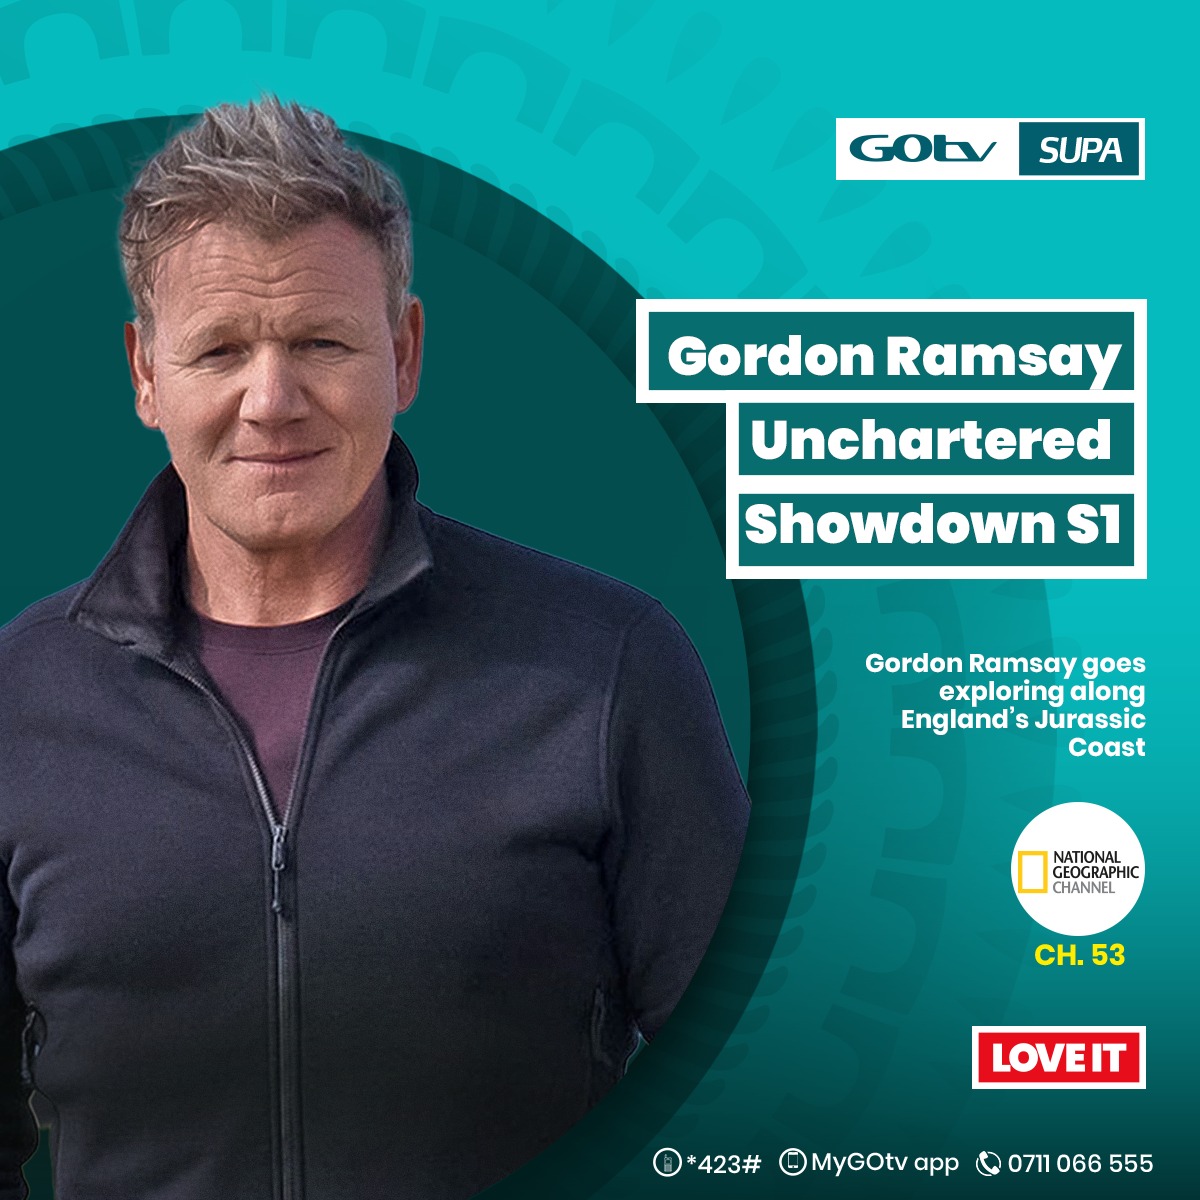 Join Gordon tonight as he explores England's Coast to find culinary gems in his own backyard. 

Watch Gordon Ramsay Uncharted Showdown S1 | Nat Geo Ch. 53 | 10:00 pm
Download #MyGOtvApp or Dial *423# to buy, pay, reconnect, or clear error codes. https://t.co/RL4WQY4IC8